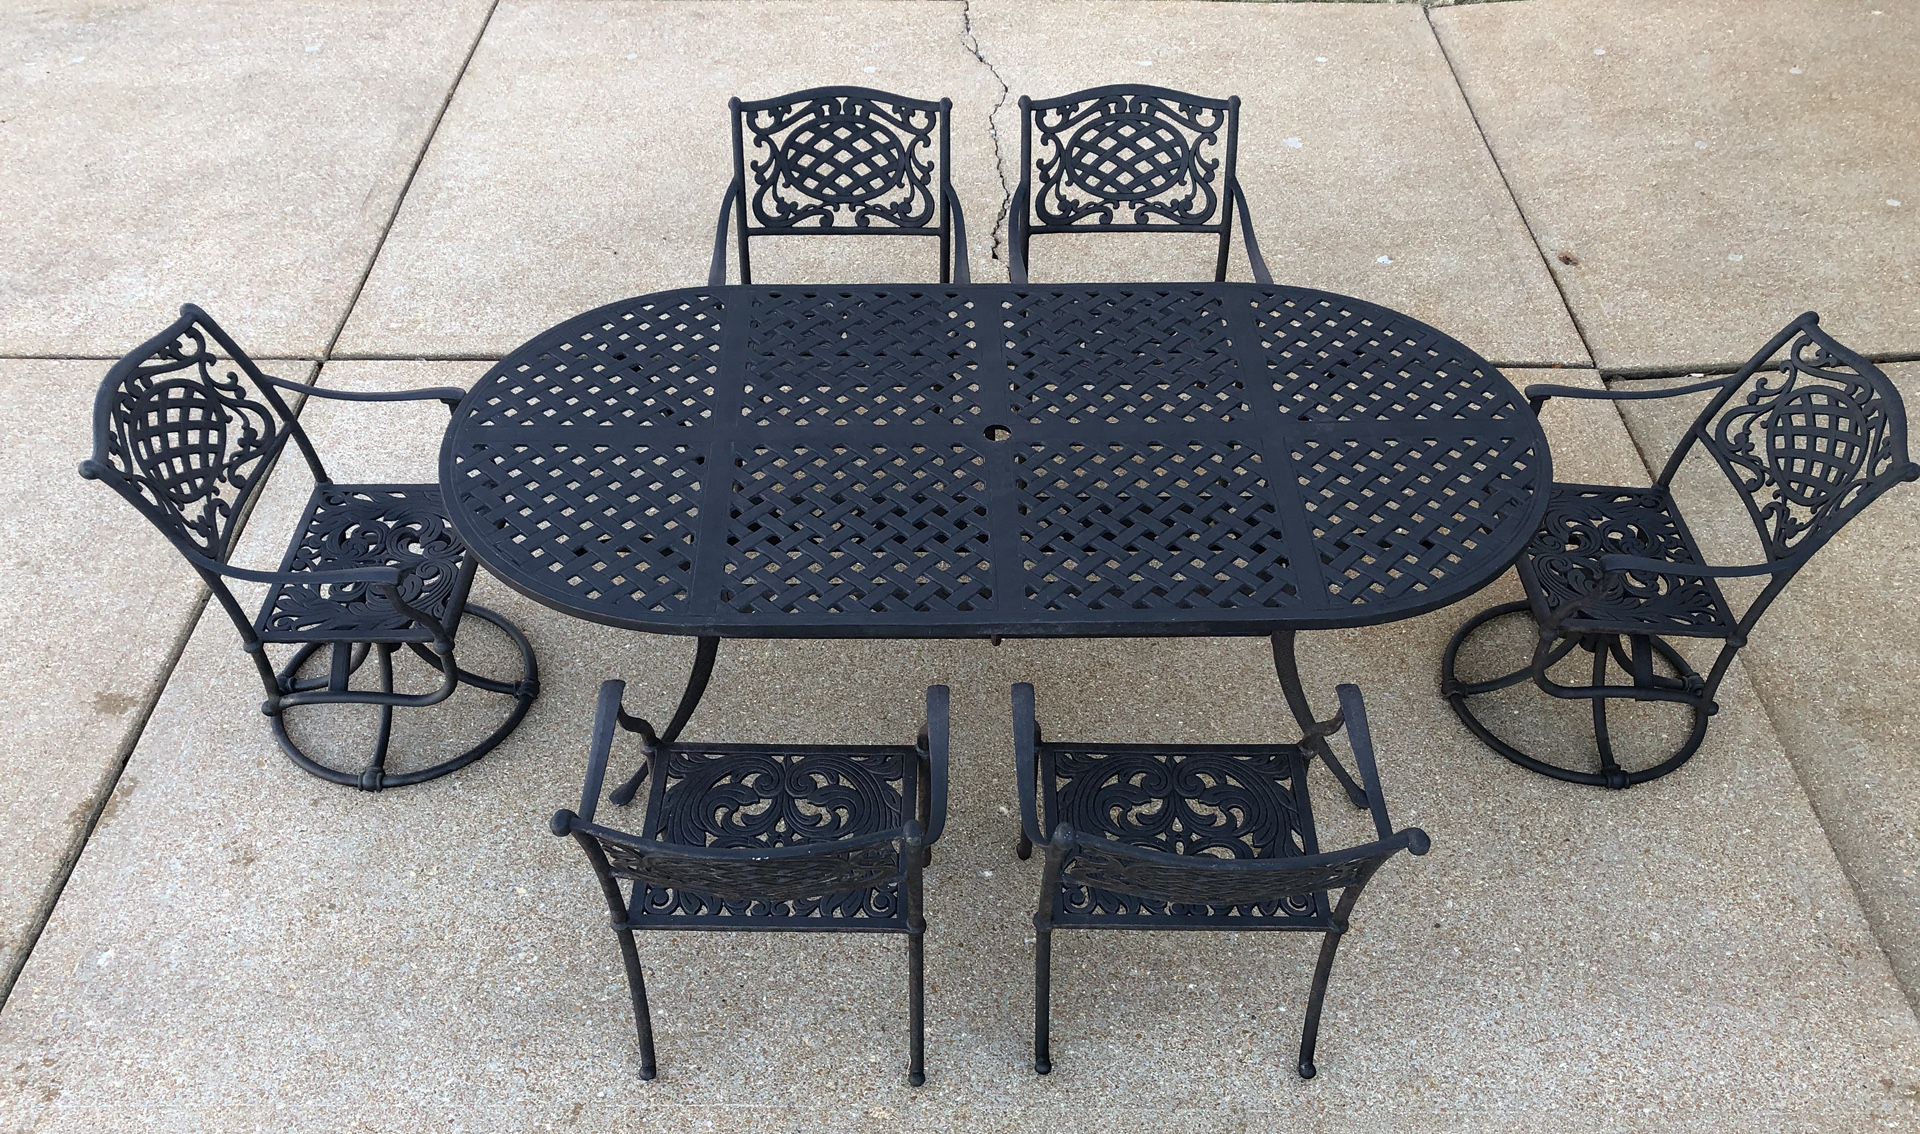 ⭕️HANAMINT Outdoor Patio Furniture 6 Seat 7 piece Dining Set-HUGE 7ft Table